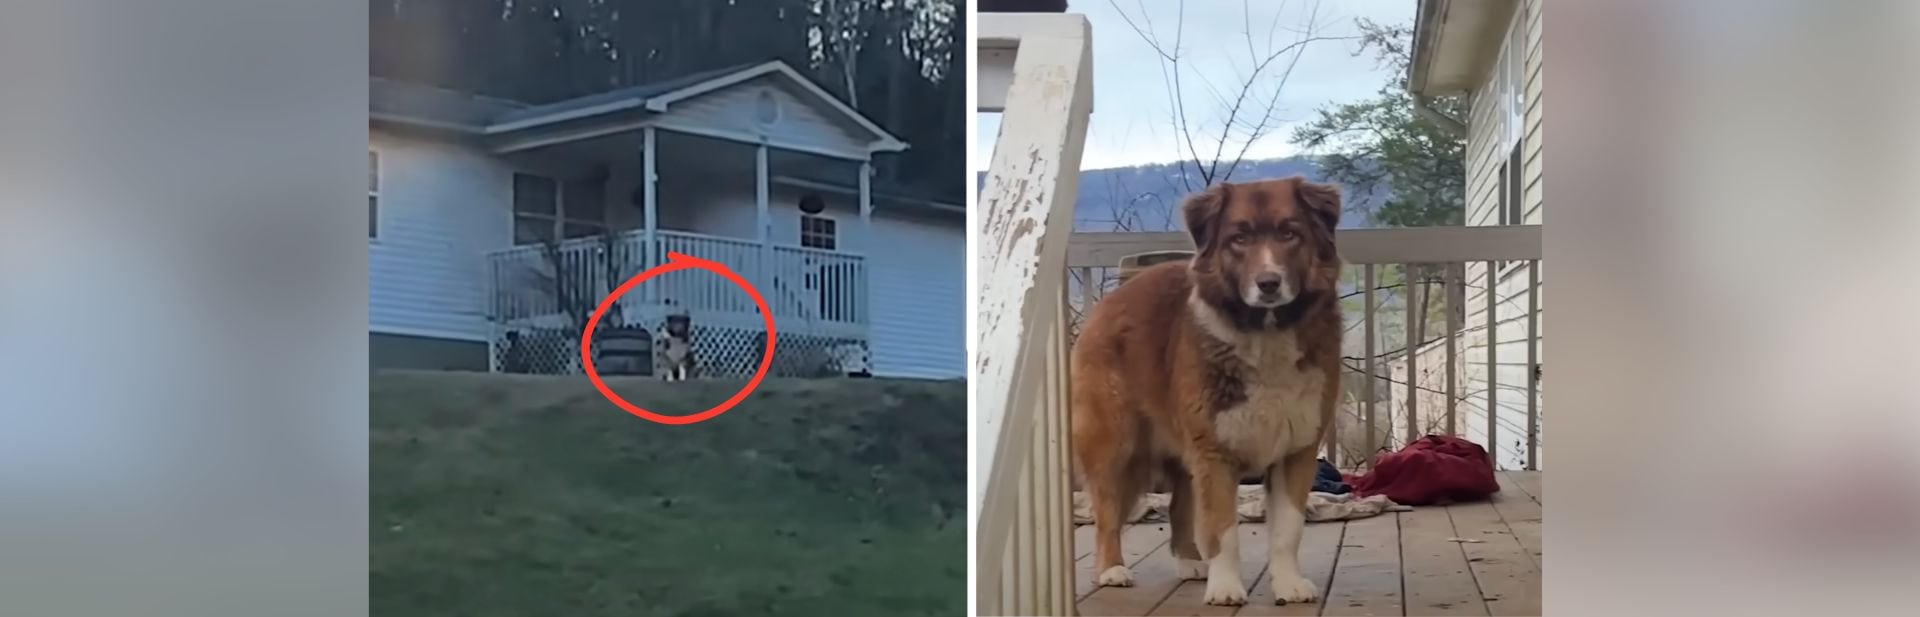 Couple’s Breakup Leaves Sweet Dog Waiting at Empty Home Until Kind-hearted Rescuer Steps In